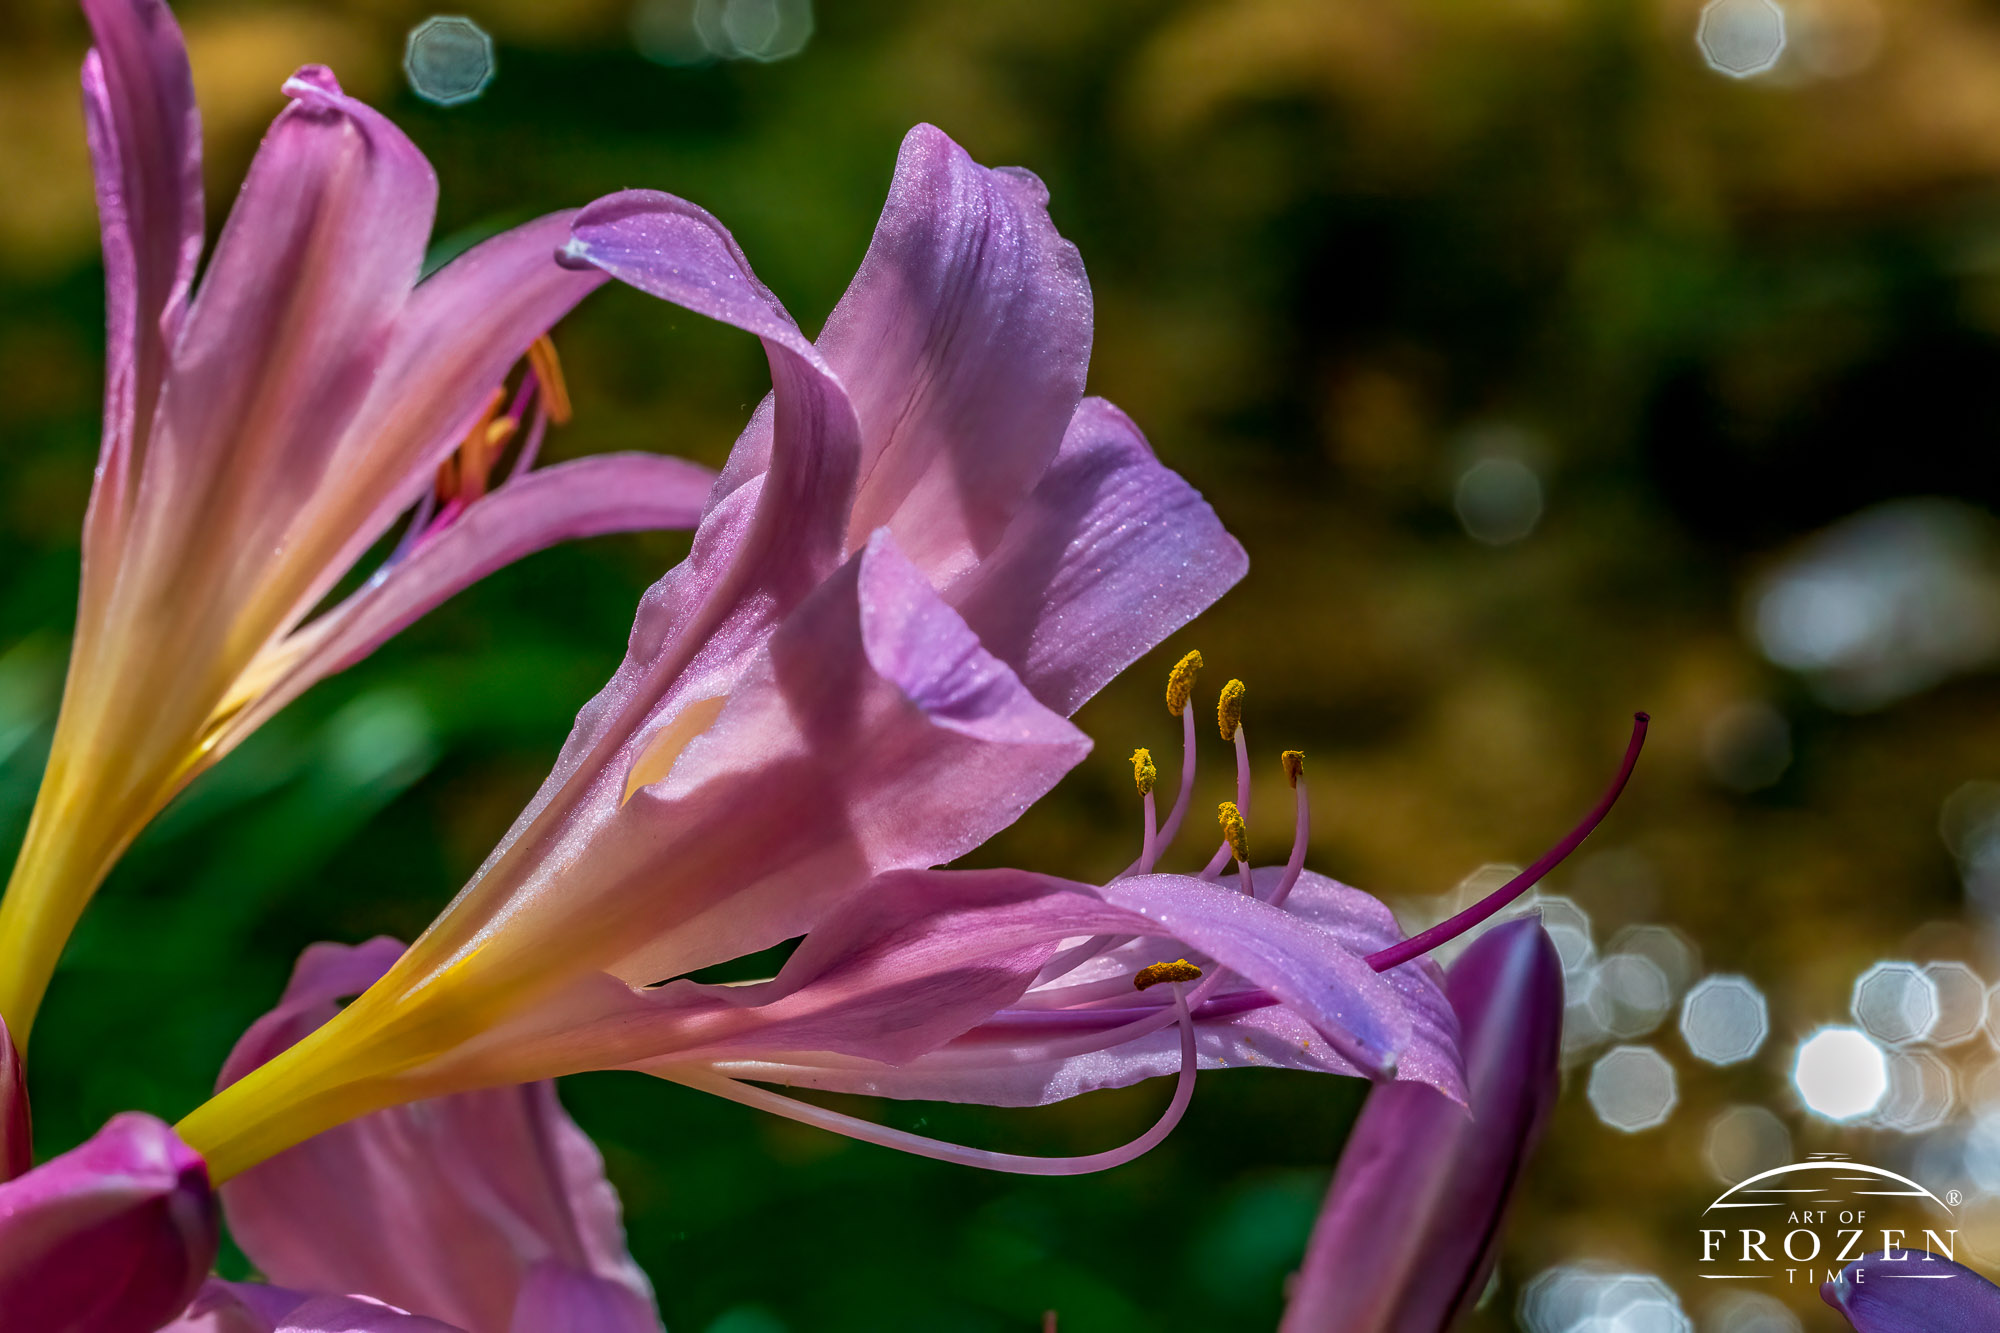 A light pink lily called the Surprise Lily catching sunlight from the forest floor at Aullwood MetroPark